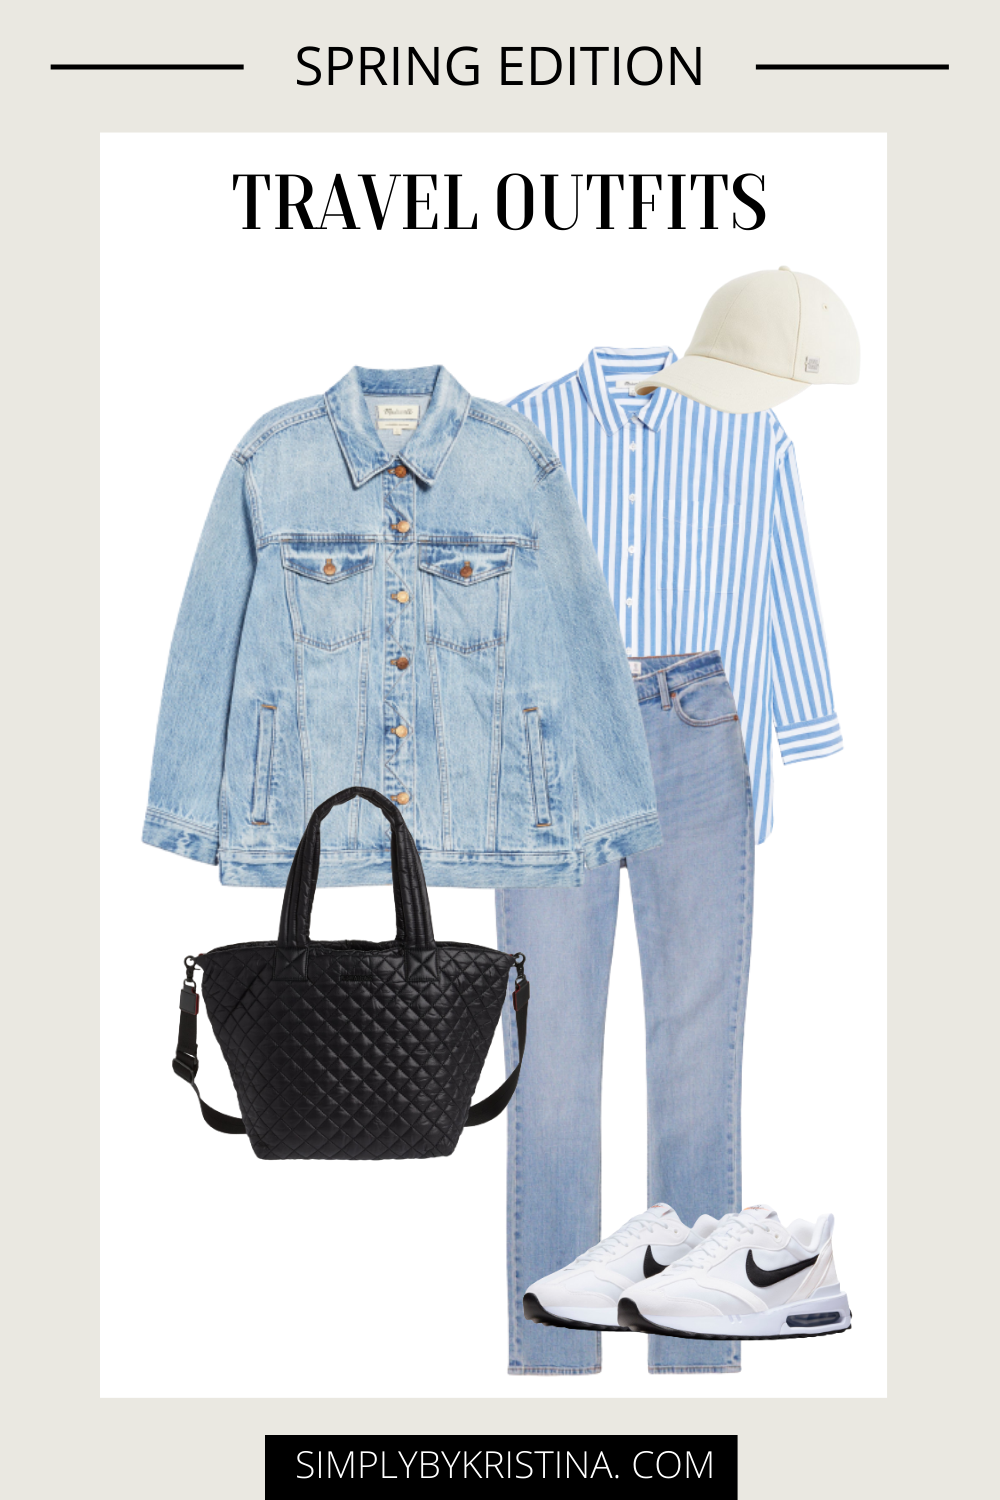 Airport | Airport Outfit | Airport Outfit Spring | Spring Airport Outfit | Airport Aesthetic | Airport Outfits | Airport Outfit Aesthetic | Airport Fits | Plane Outfits | Flight Outfit 
